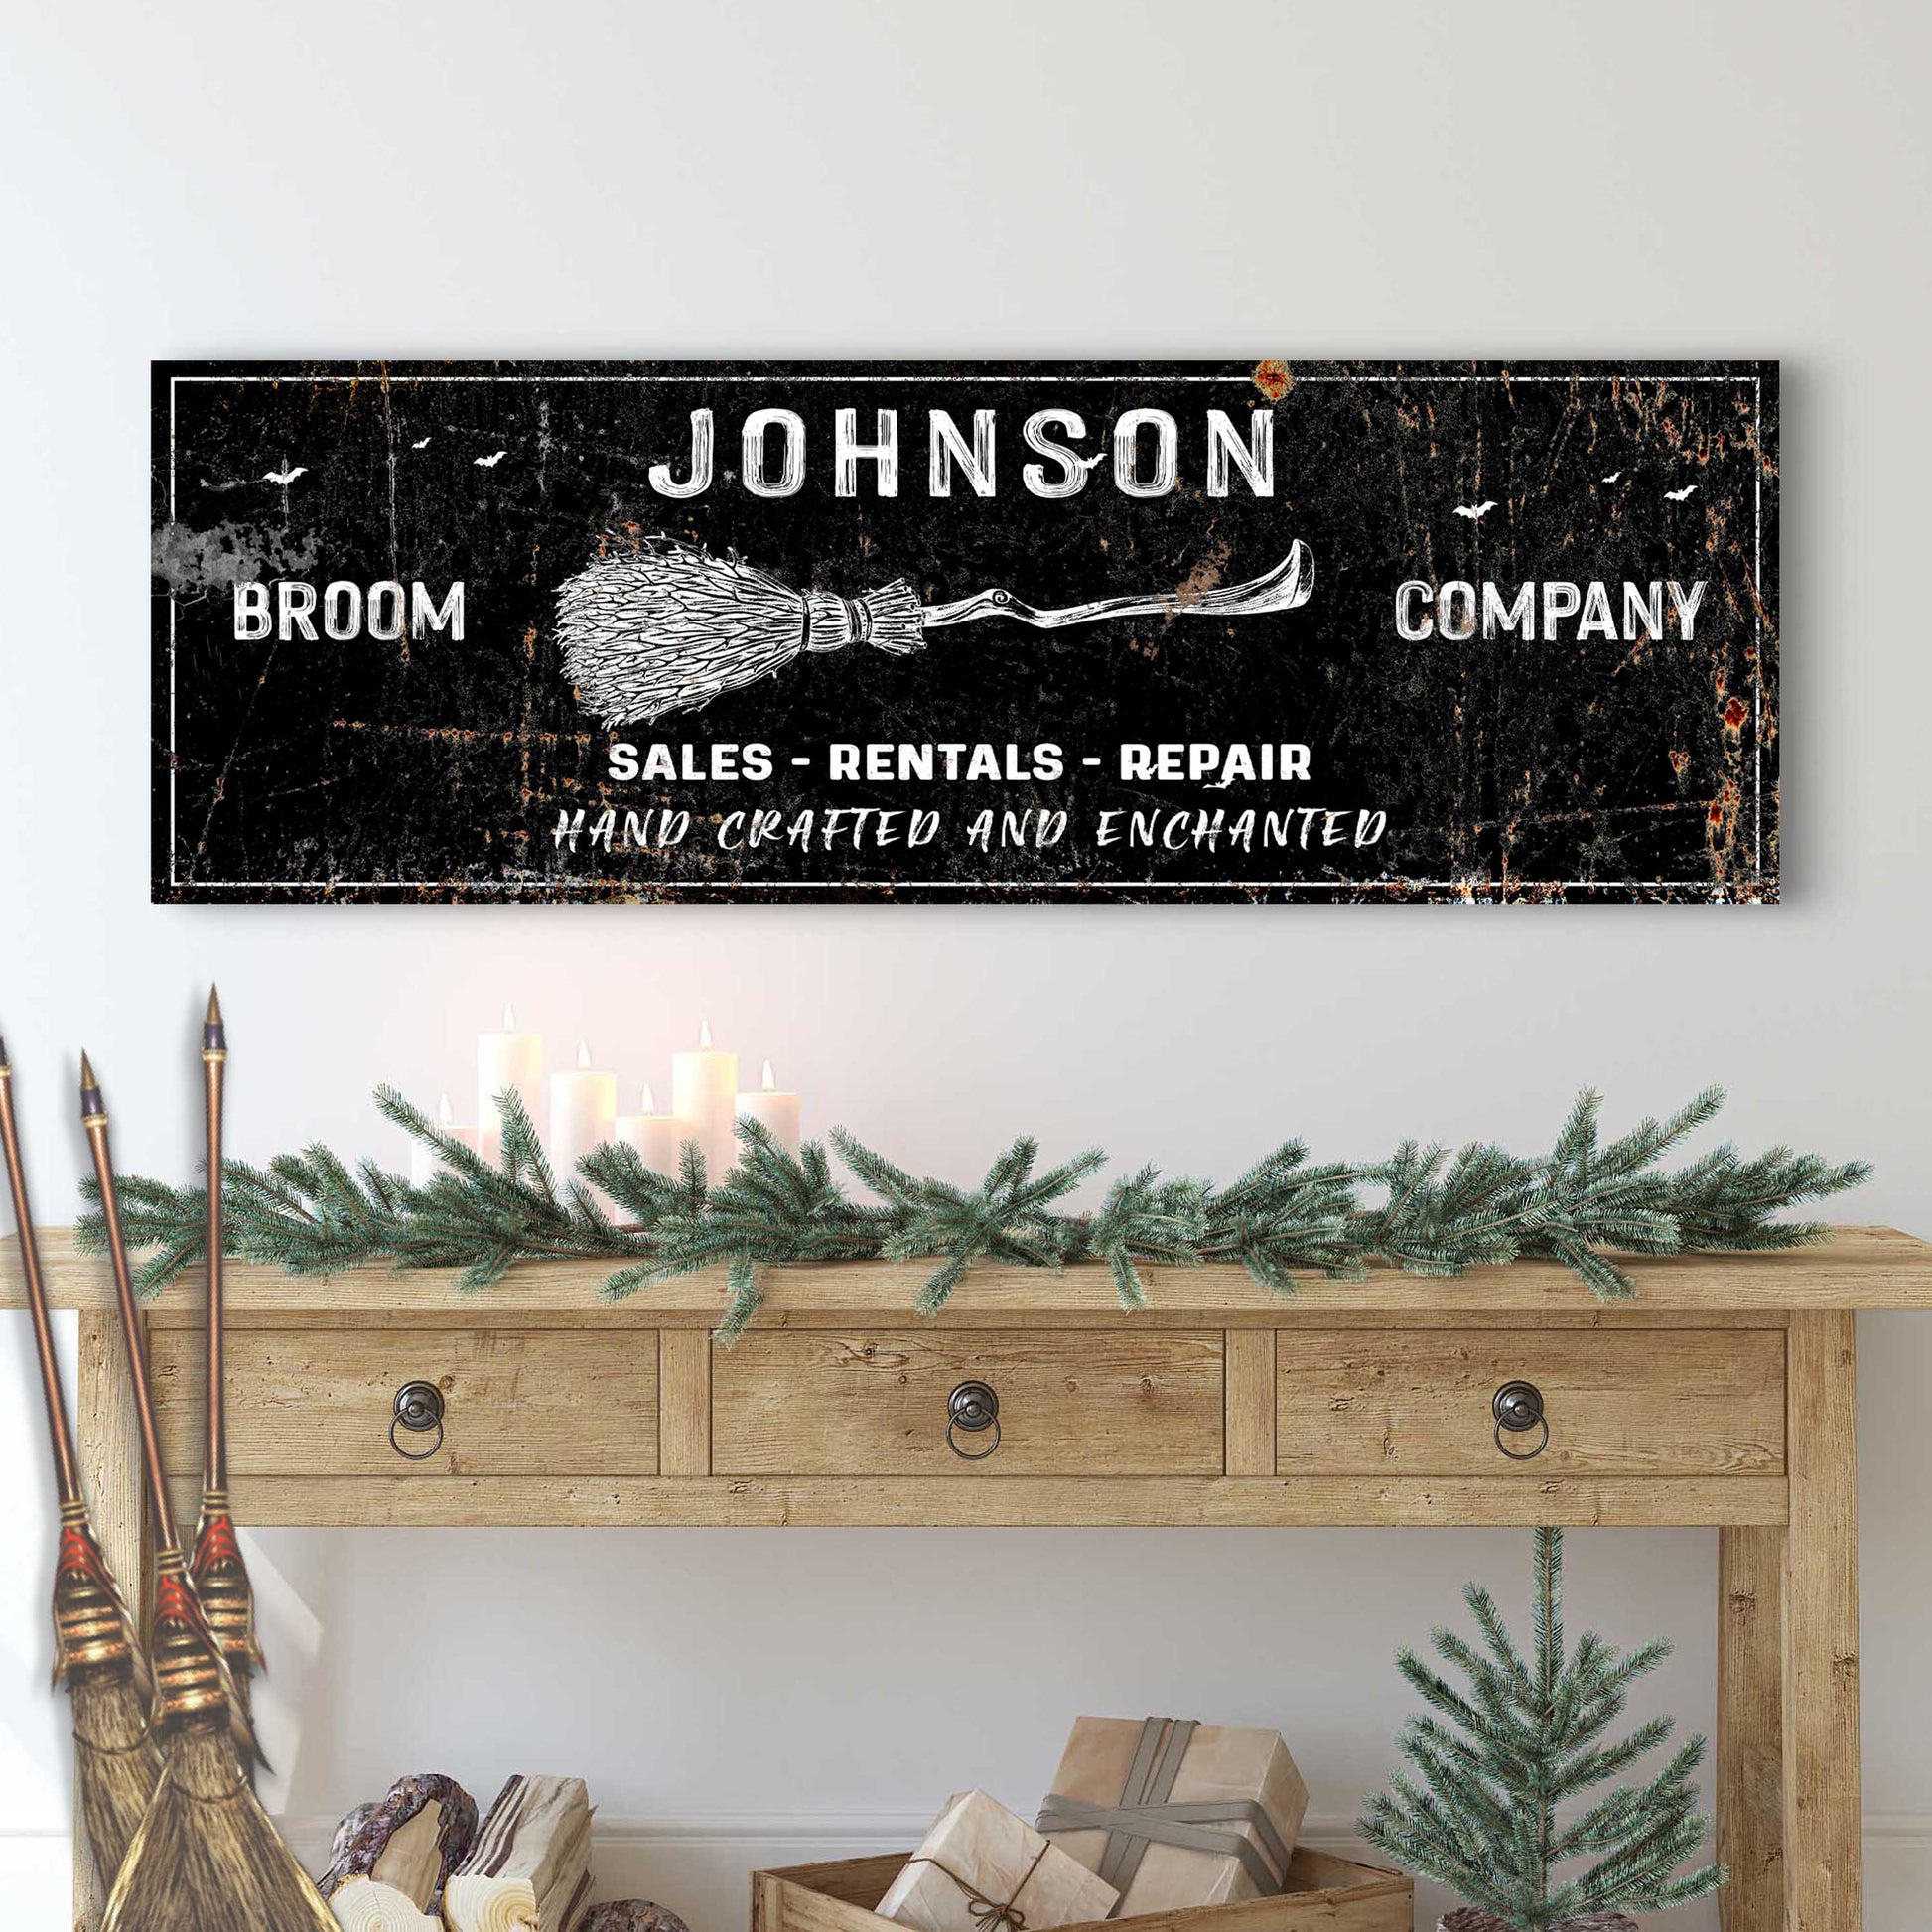 Broom Company Sign Style 2 - Image by Tailored Canvases